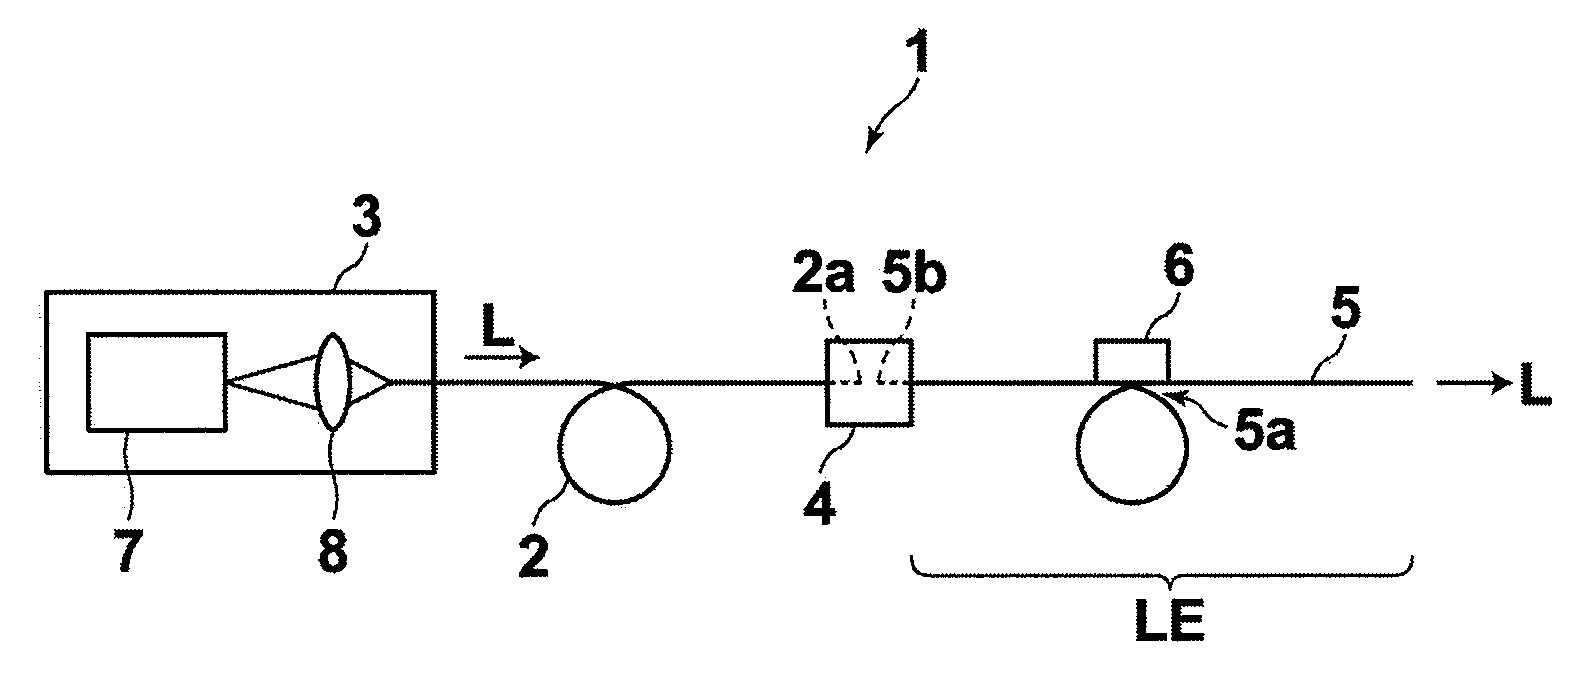 Low-speckle light source device